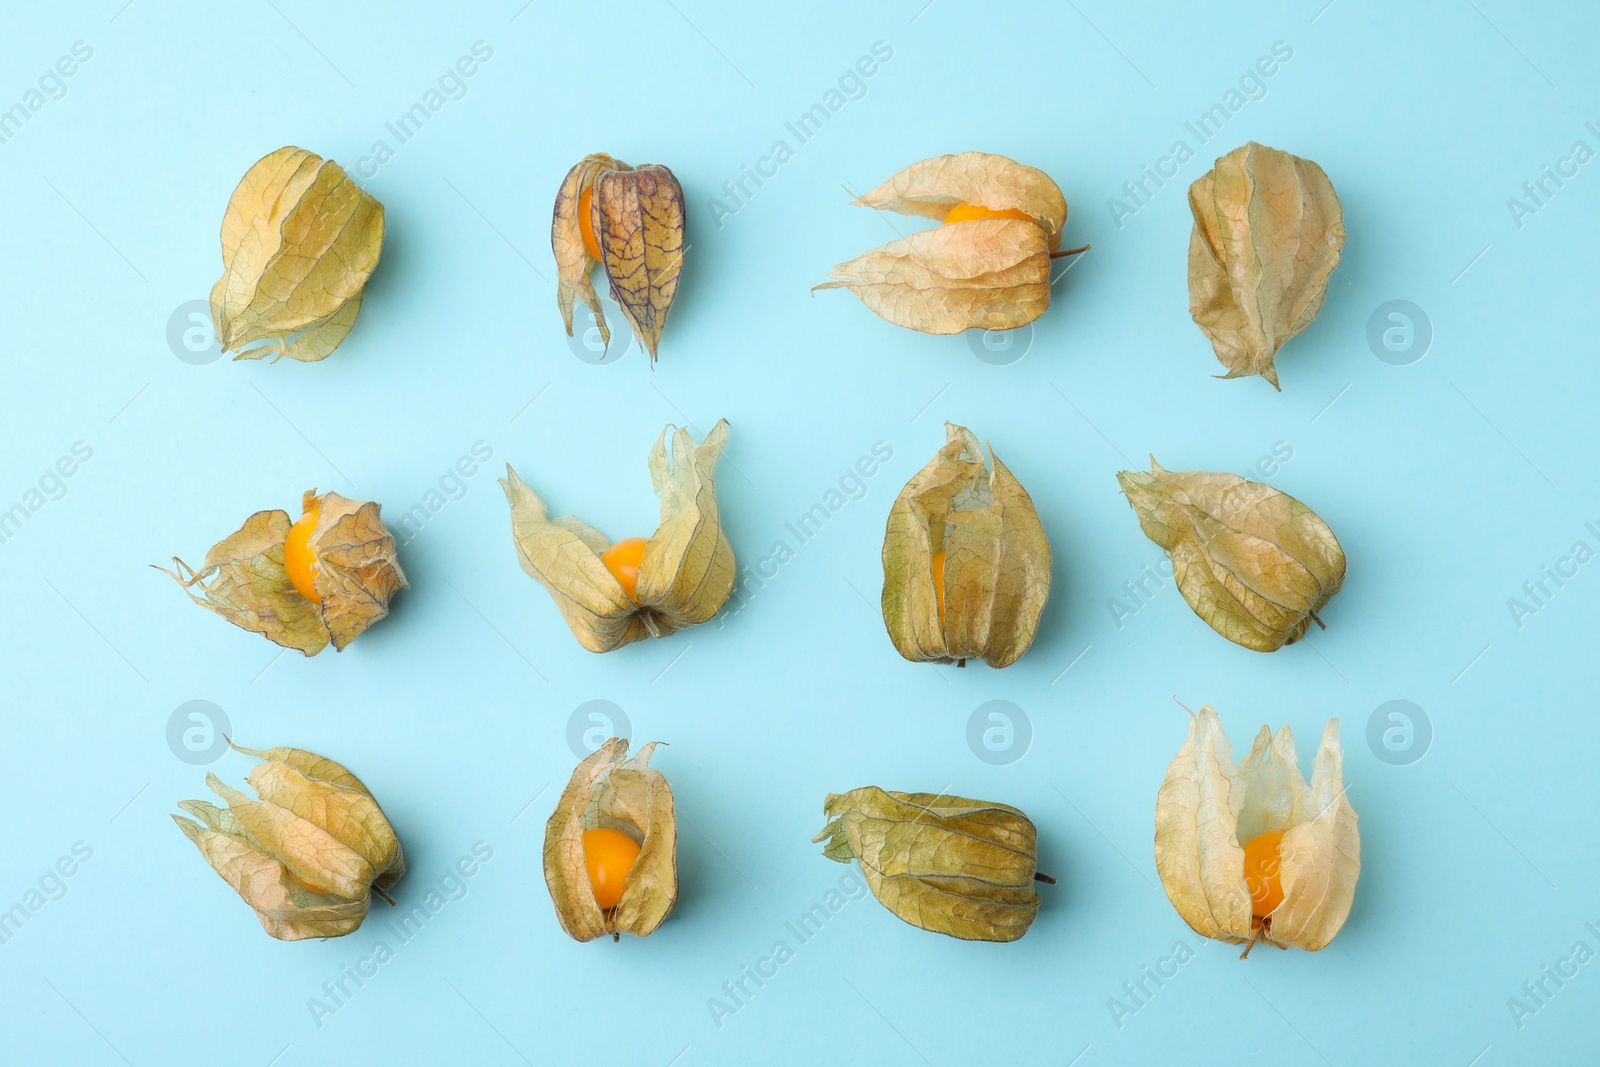 Photo of Ripe physalis fruits with calyxes on light blue background, flat lay